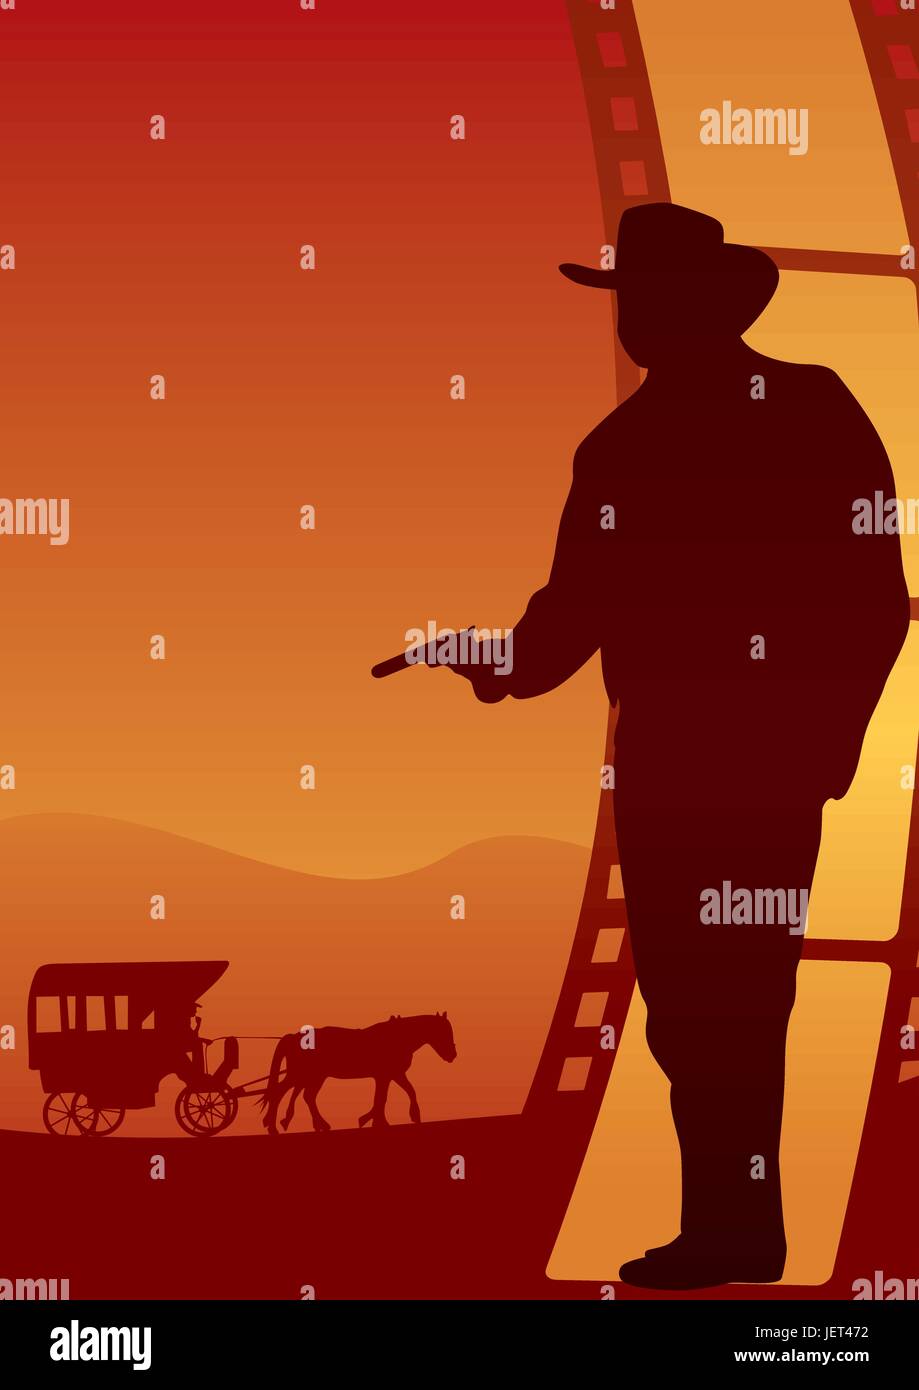 Film cowboy Stock Vector Images - Alamy